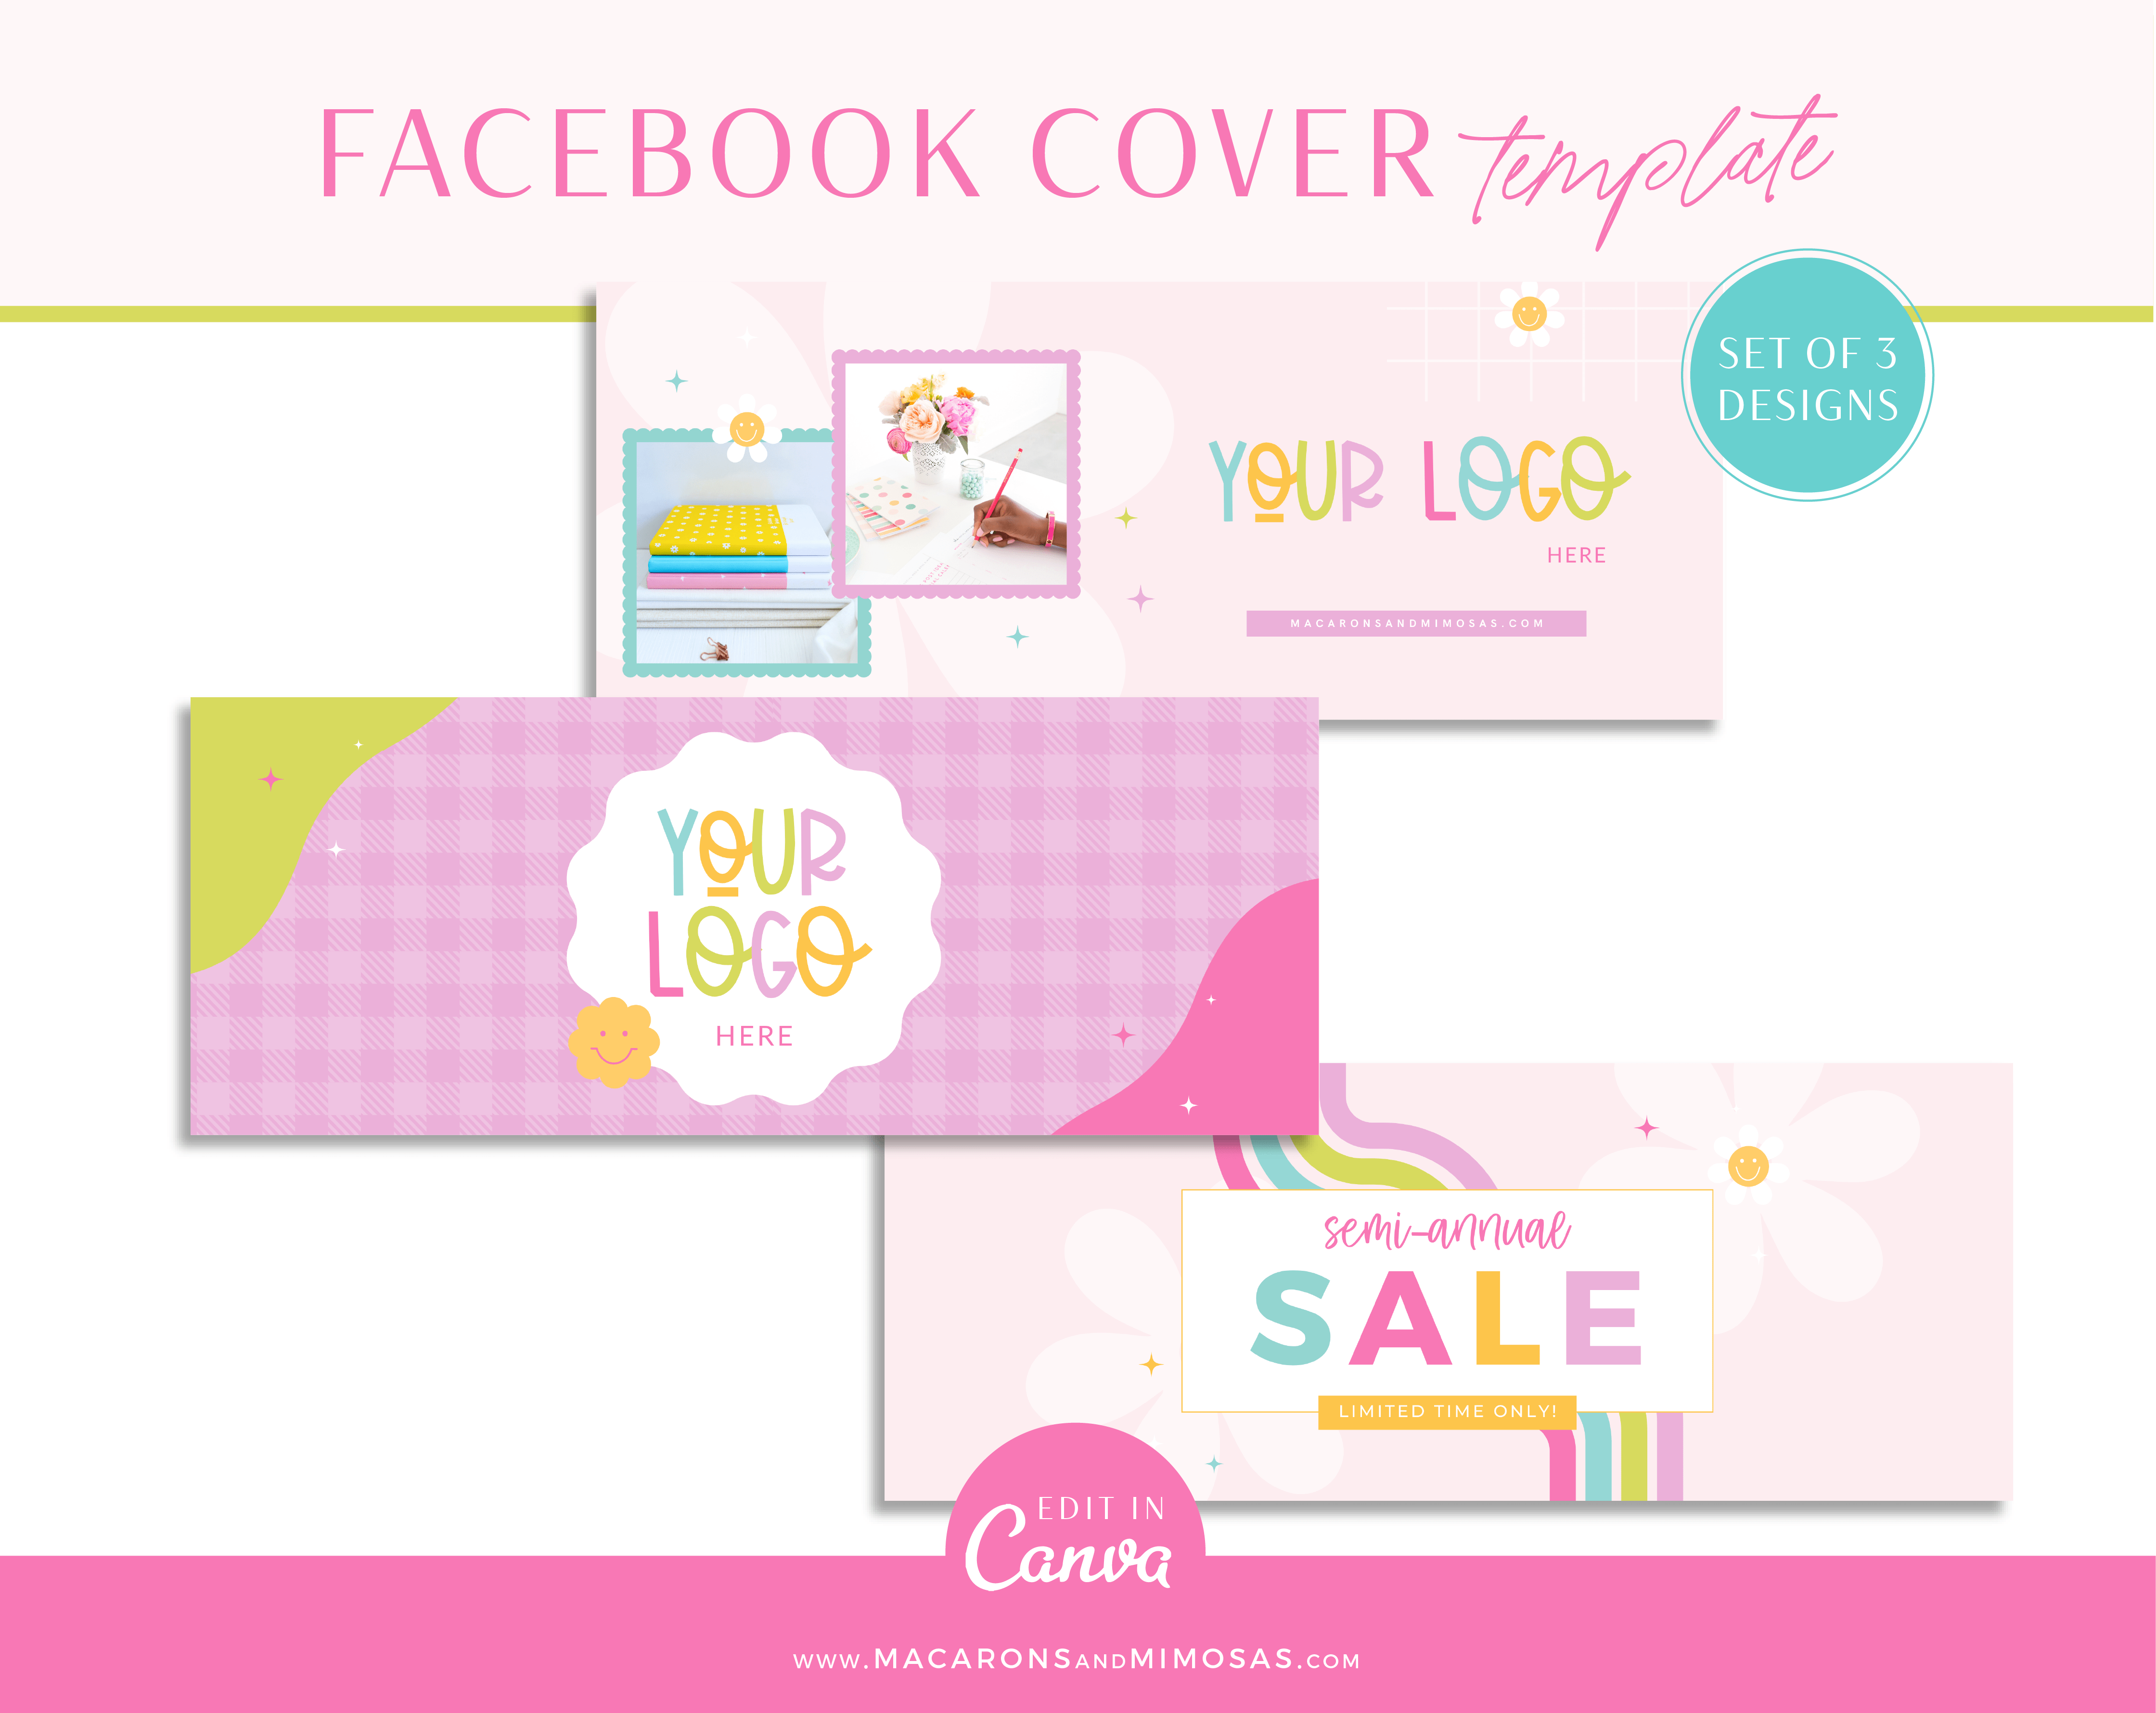 Bright Rainbow Facebook Cover Template Bundle is editable in Canva. Colorful Social media banner tempaltes your brand to showcase discounts, new products and sales.